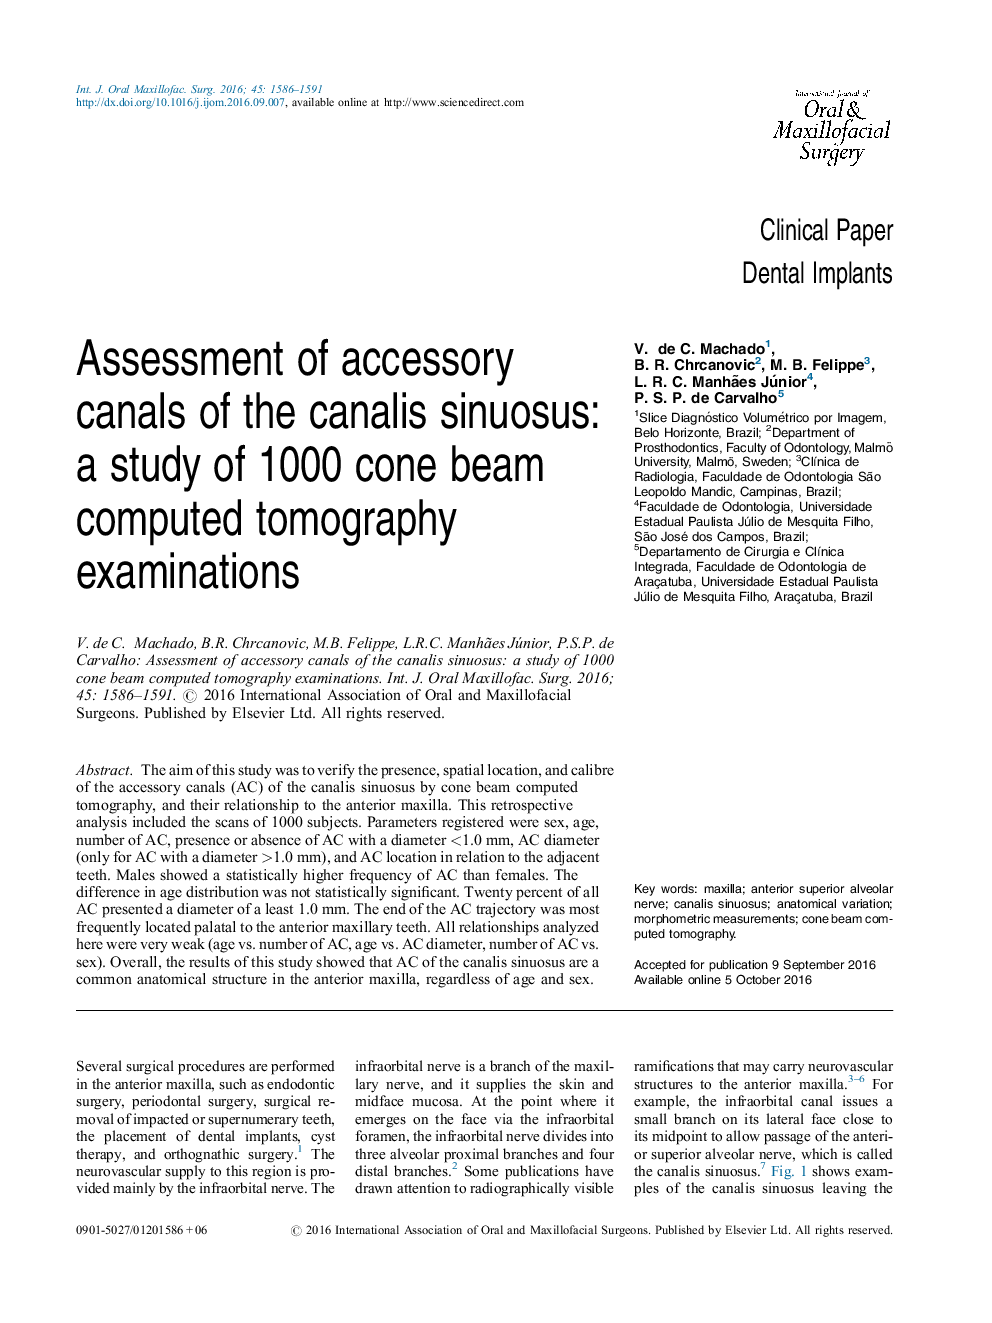 Assessment of accessory canals of the canalis sinuosus: a study of 1000 cone beam computed tomography examinations